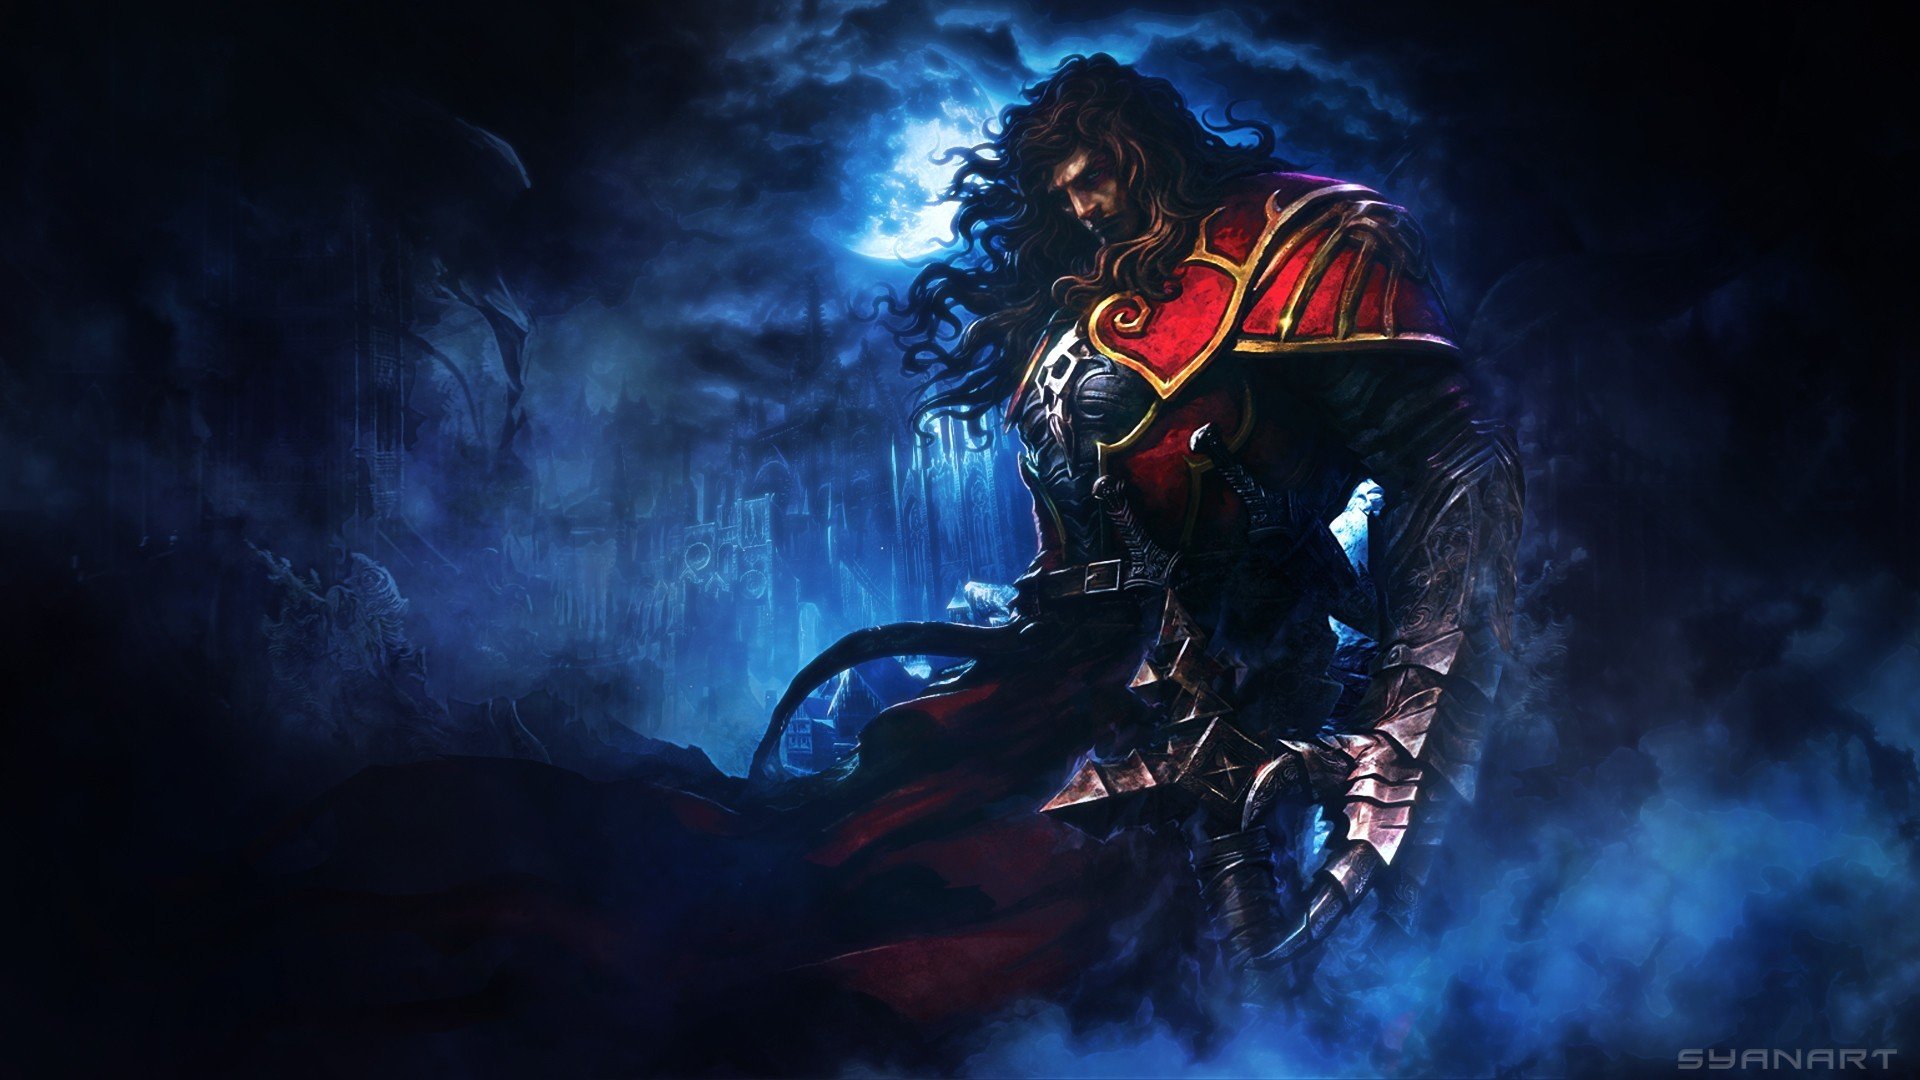 Castlevania: Lords of Shadow Wallpaper